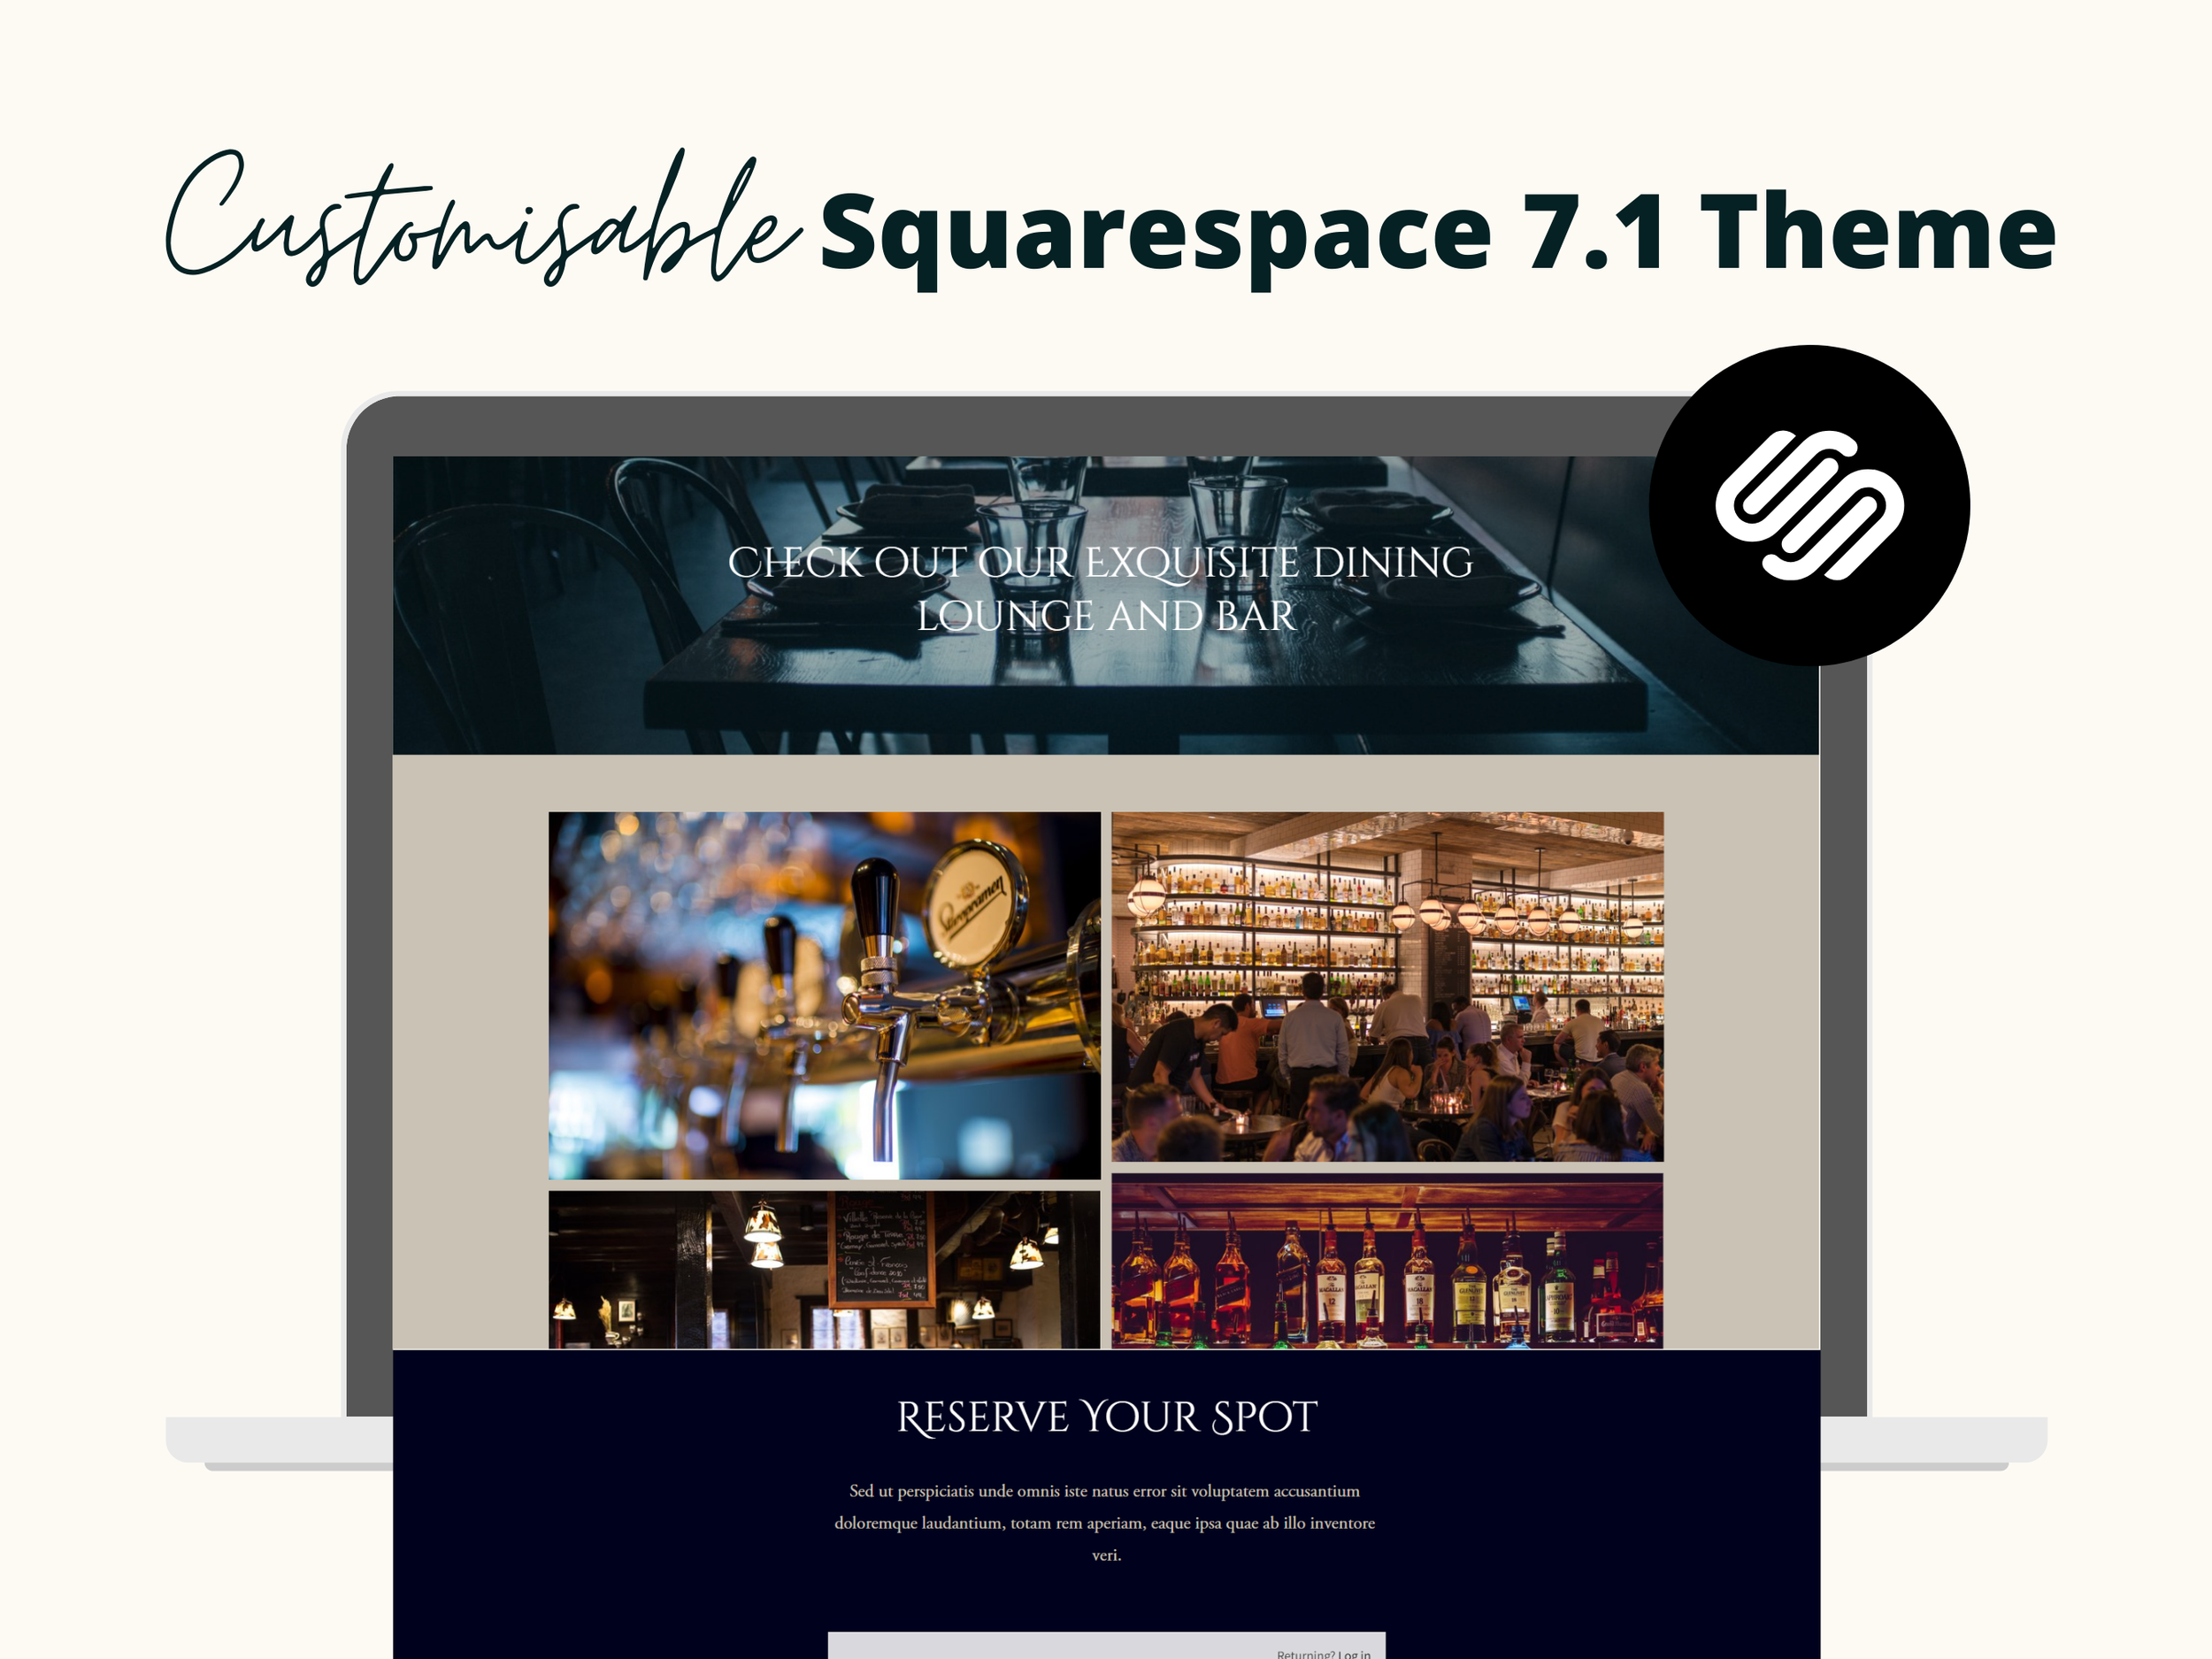 The+Ivy+Bar+%26+Restaurant+Etsy+Graphics.png